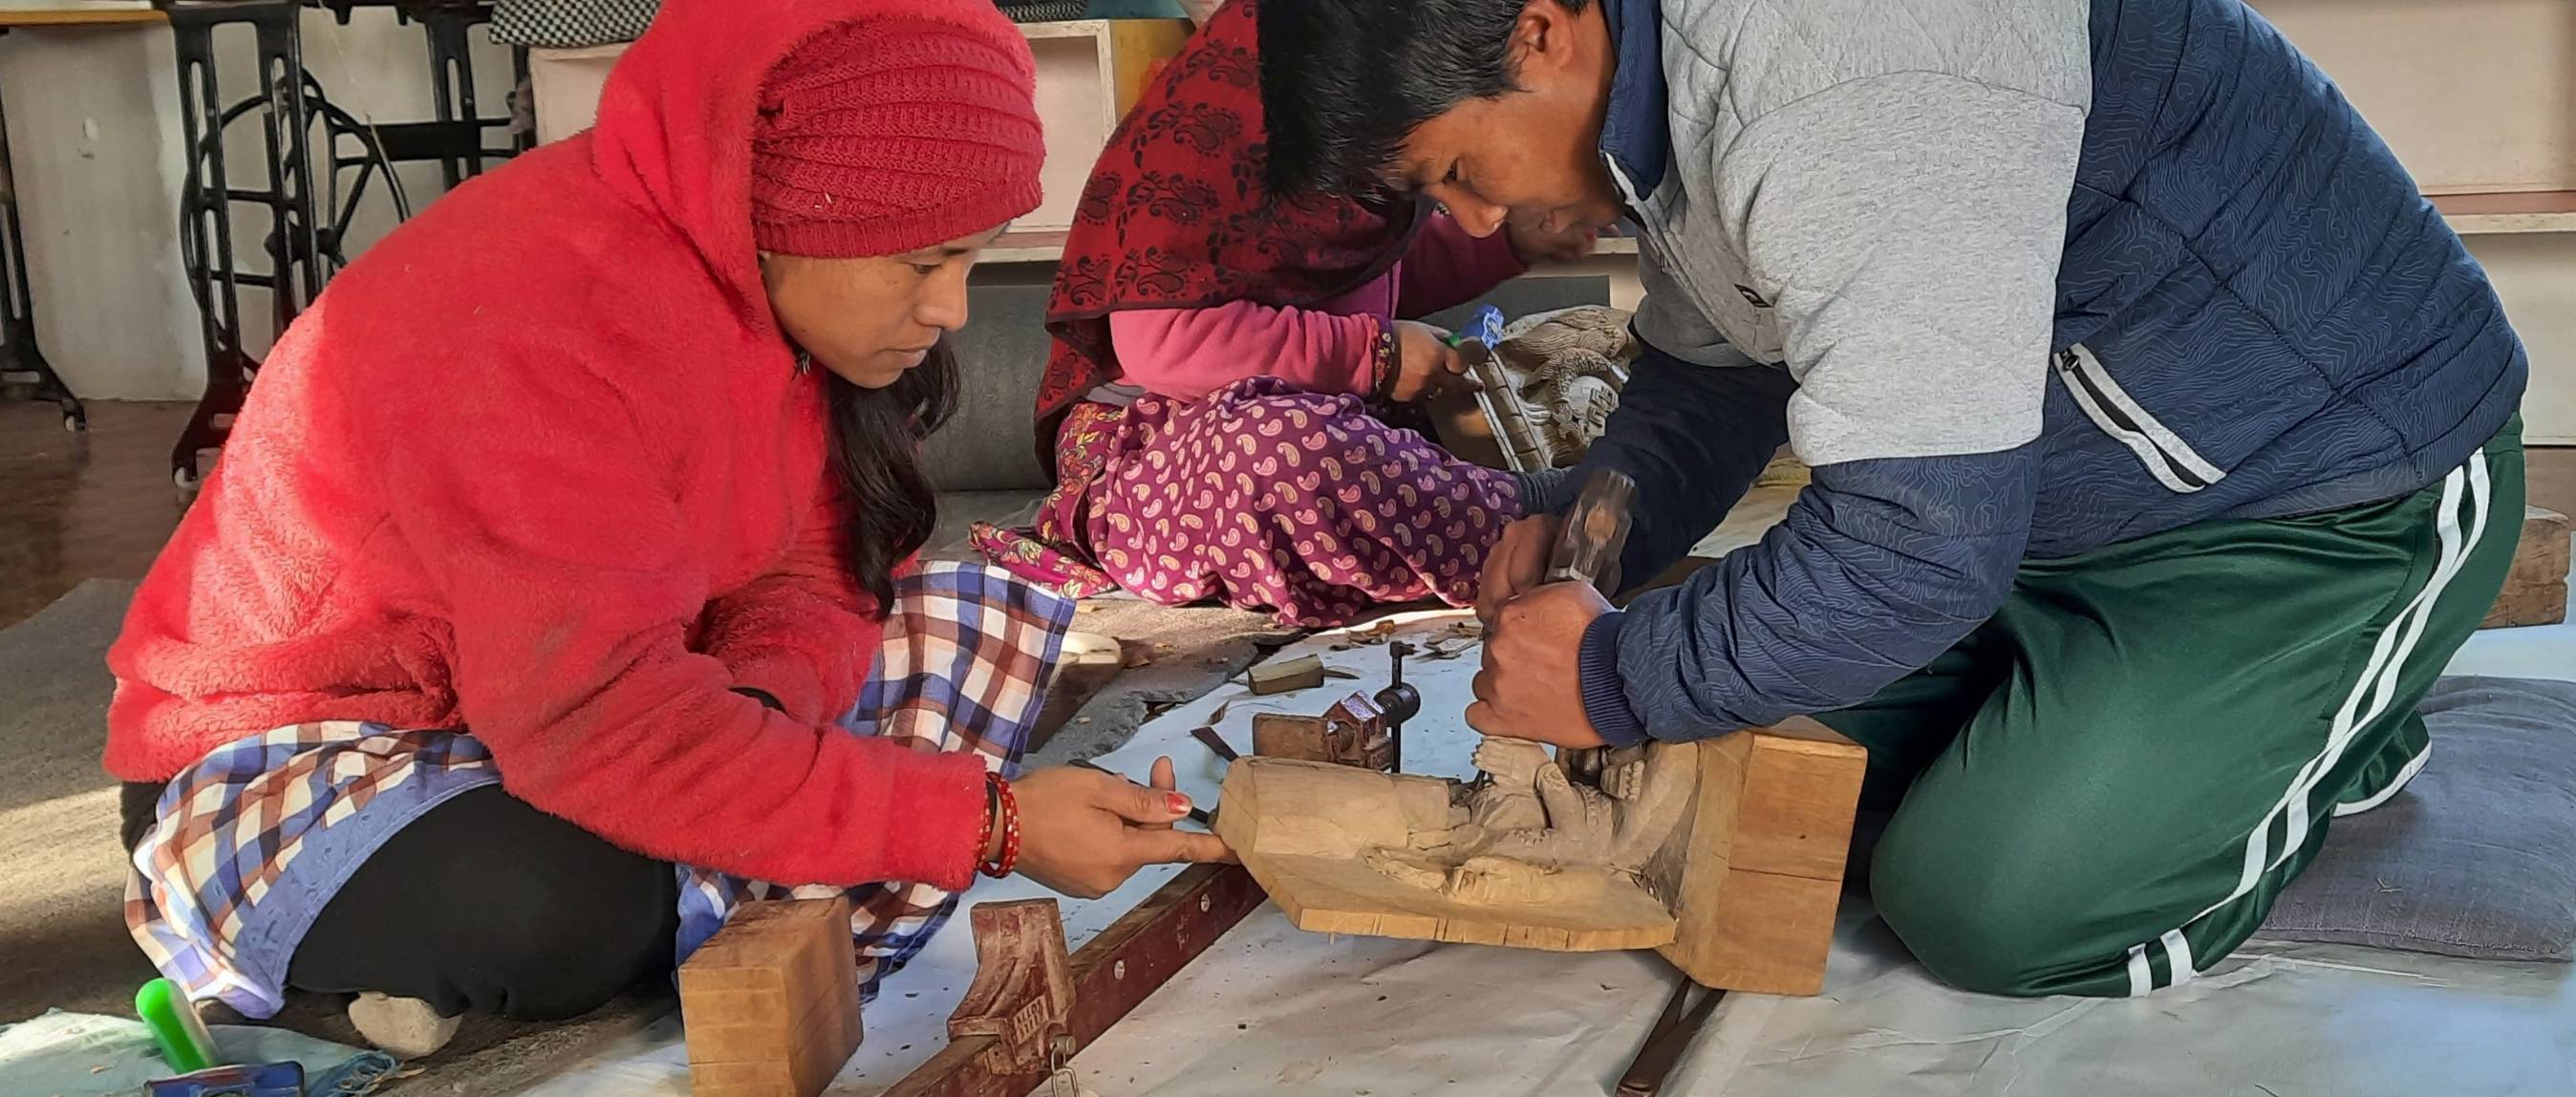 Nepalese training to learn new skills during COVID-19